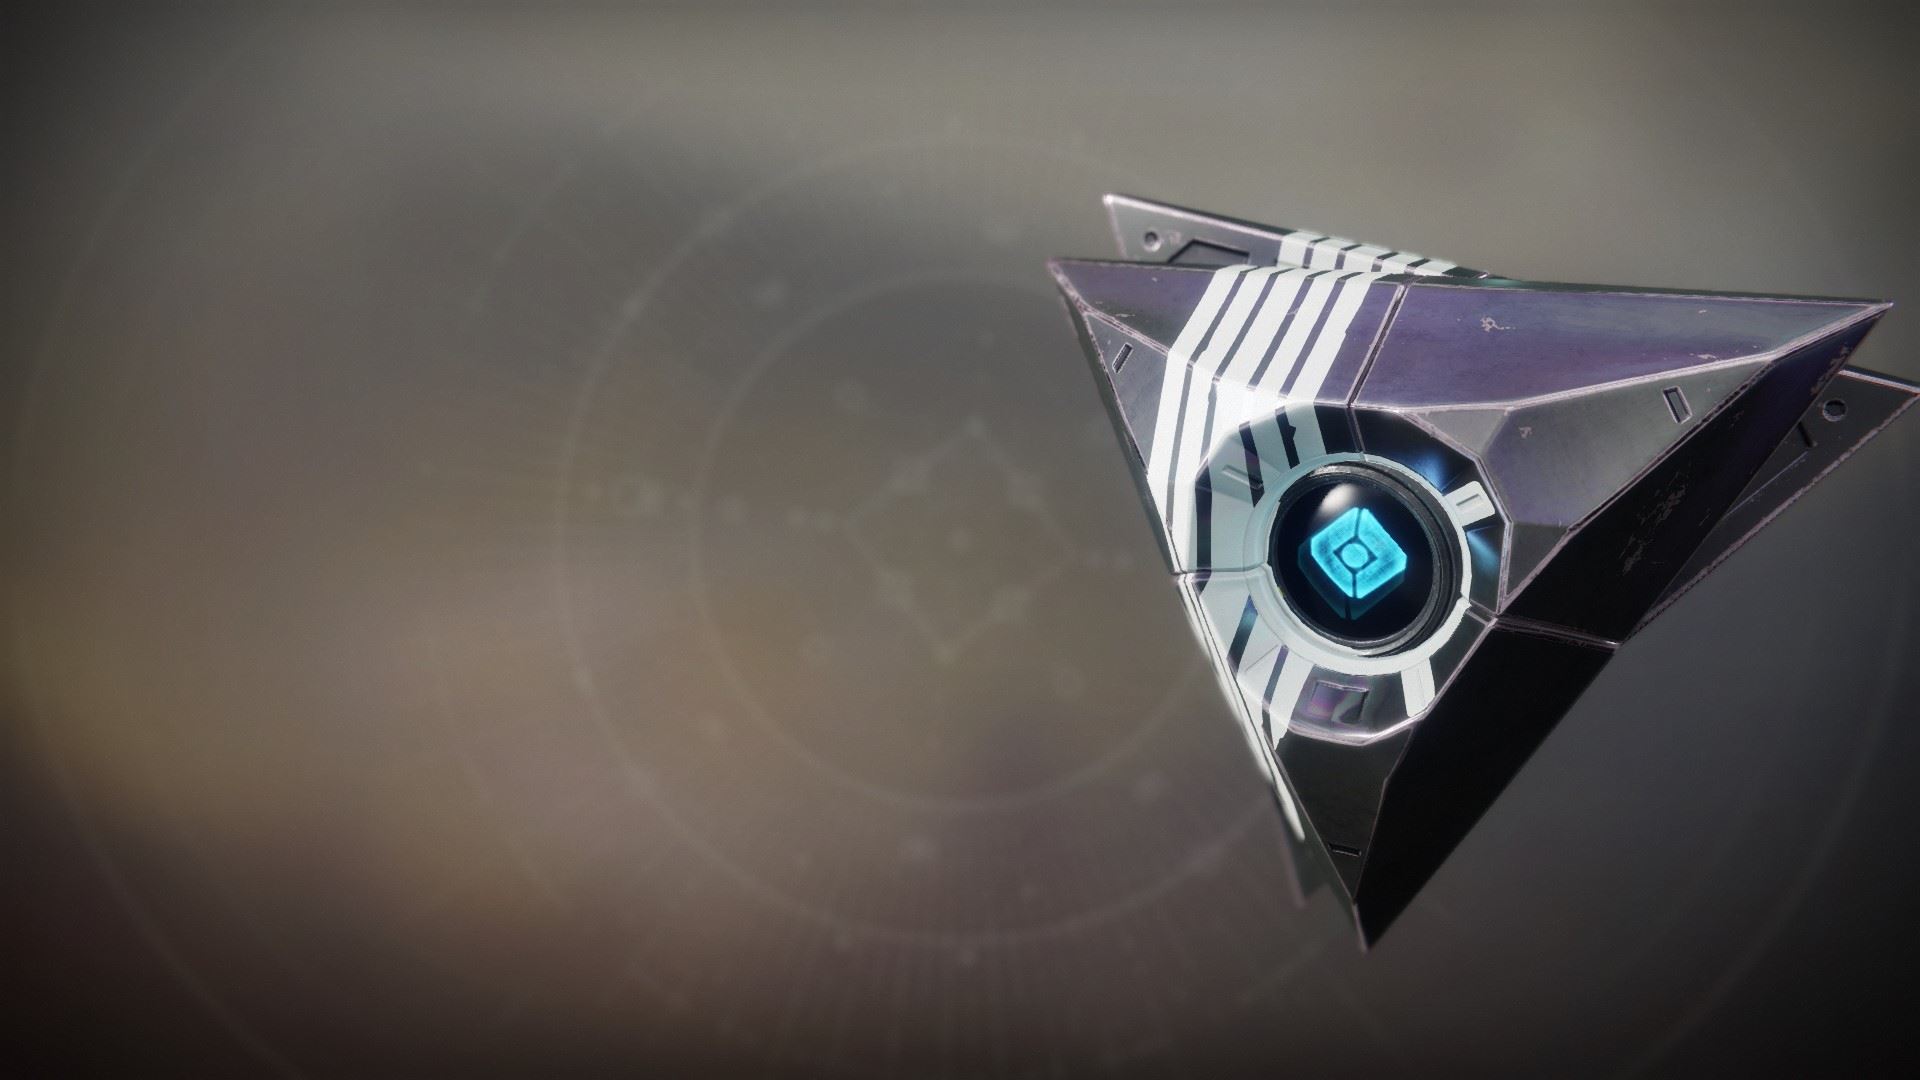 An in-game render of the Painted Eye Shell.